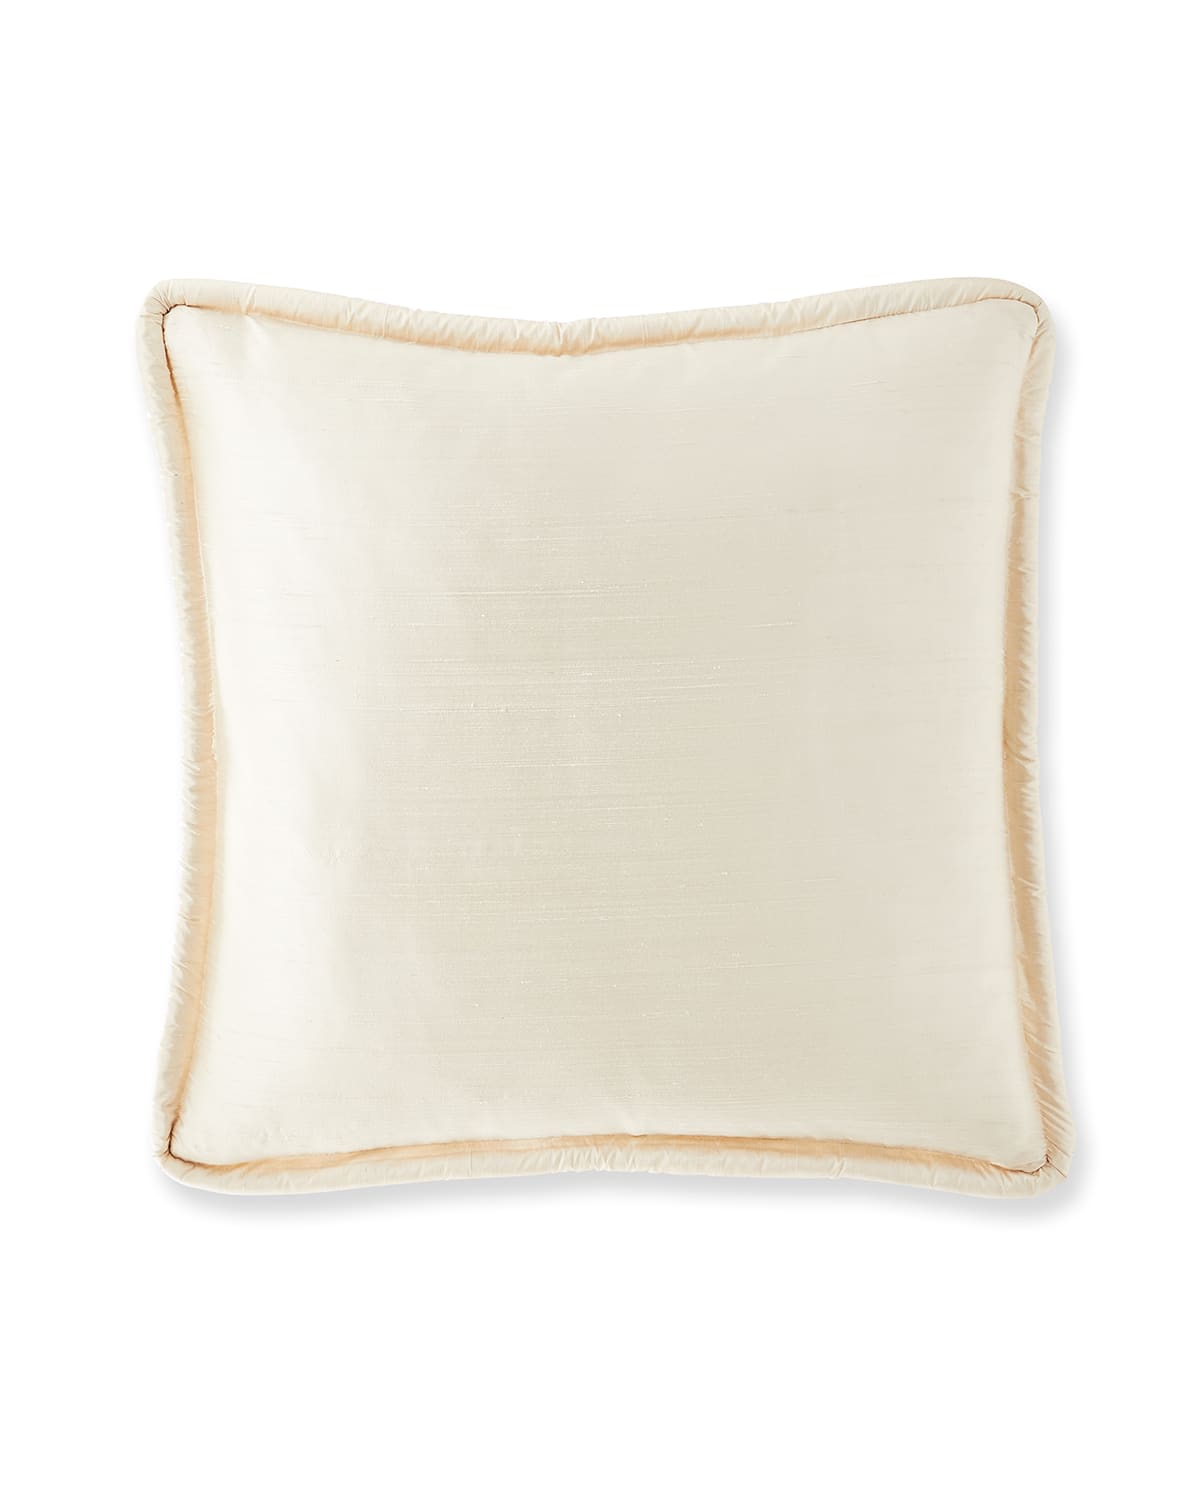 Austin Horn Collection Catherine's Palace Silk Euro Sham In Neutral